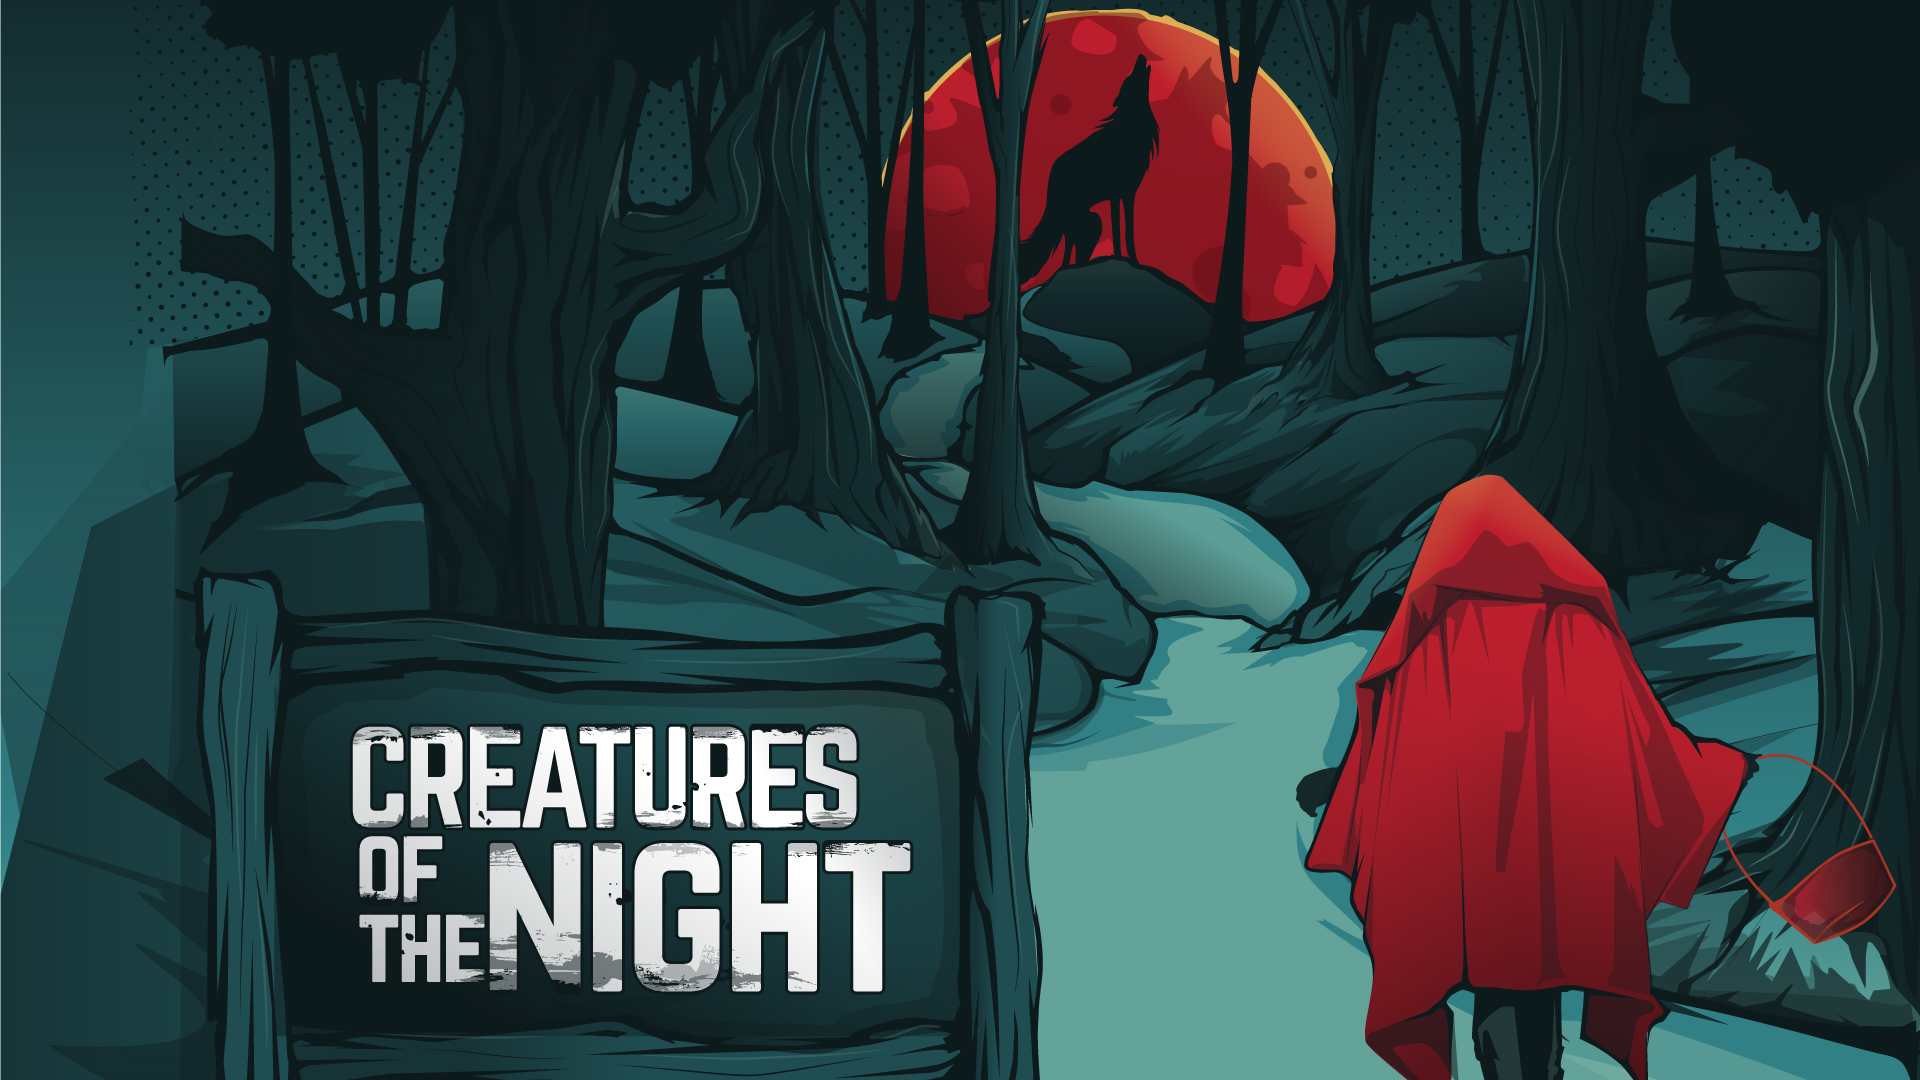 Work created for ZooTampa's Creatures of the Night Halloween event.